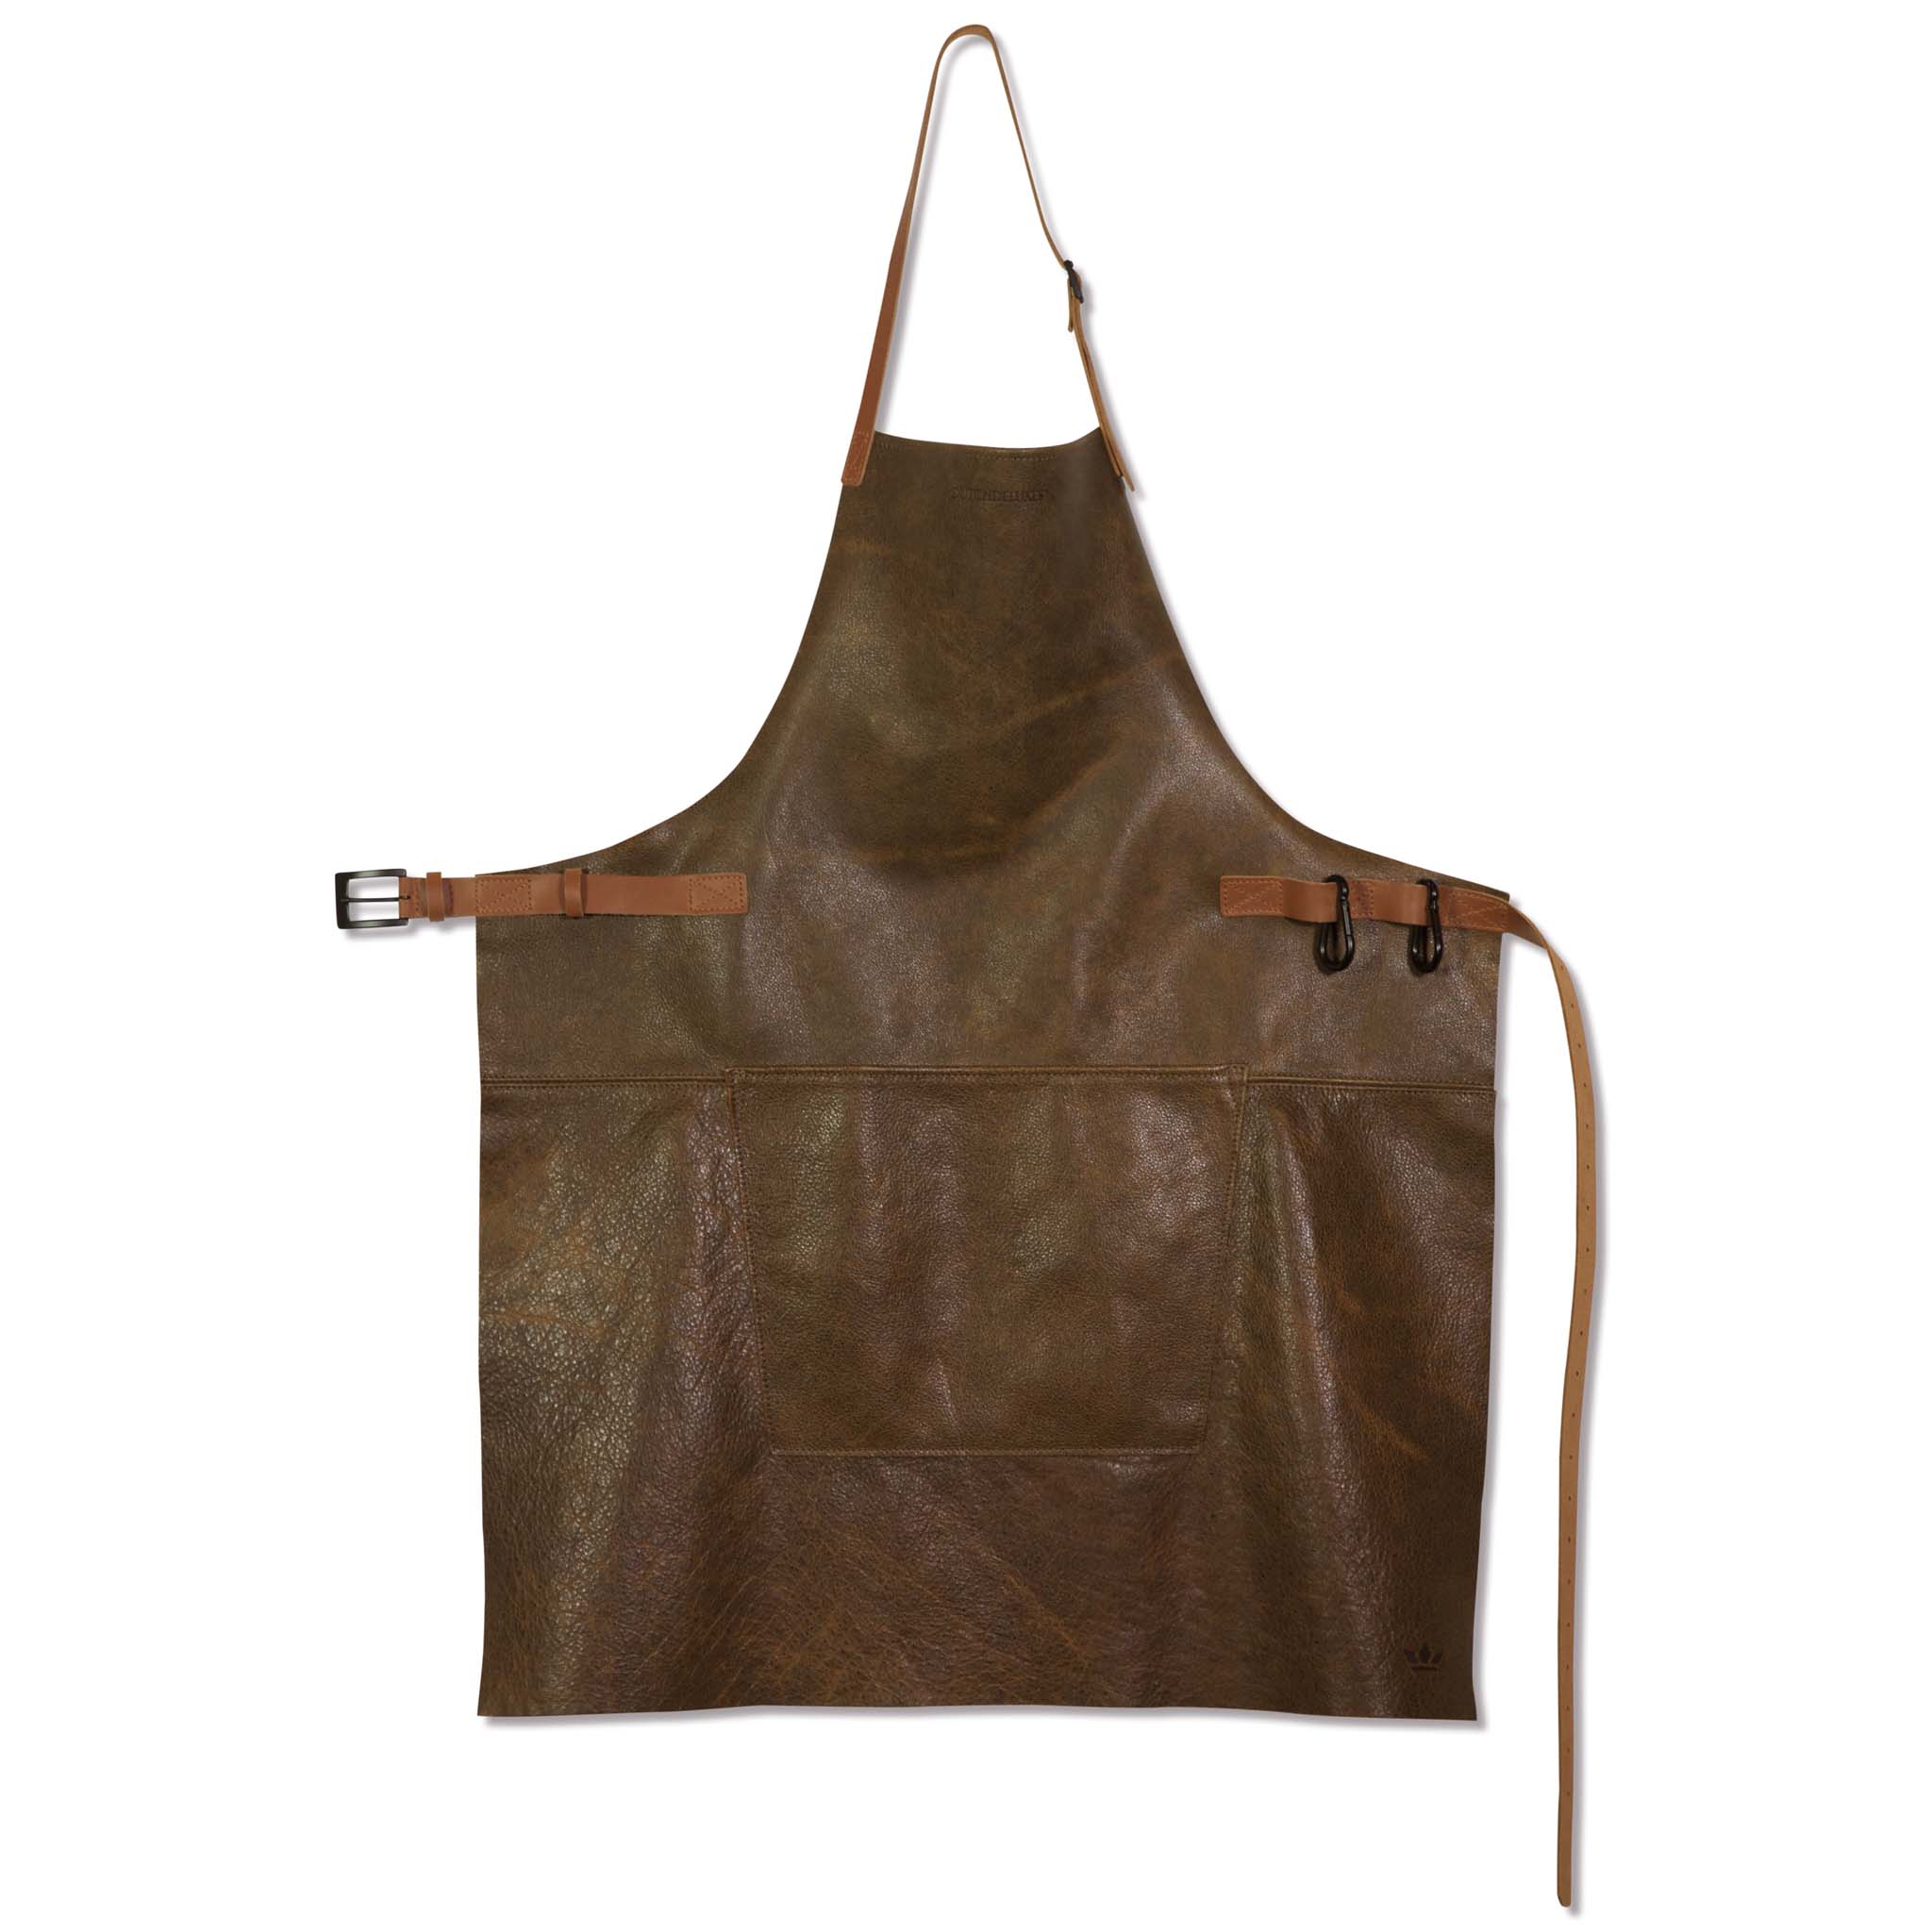 Dutchdeluxes Leather BBQ Apron in Vintage Brown Cookware Kitchen Clothing